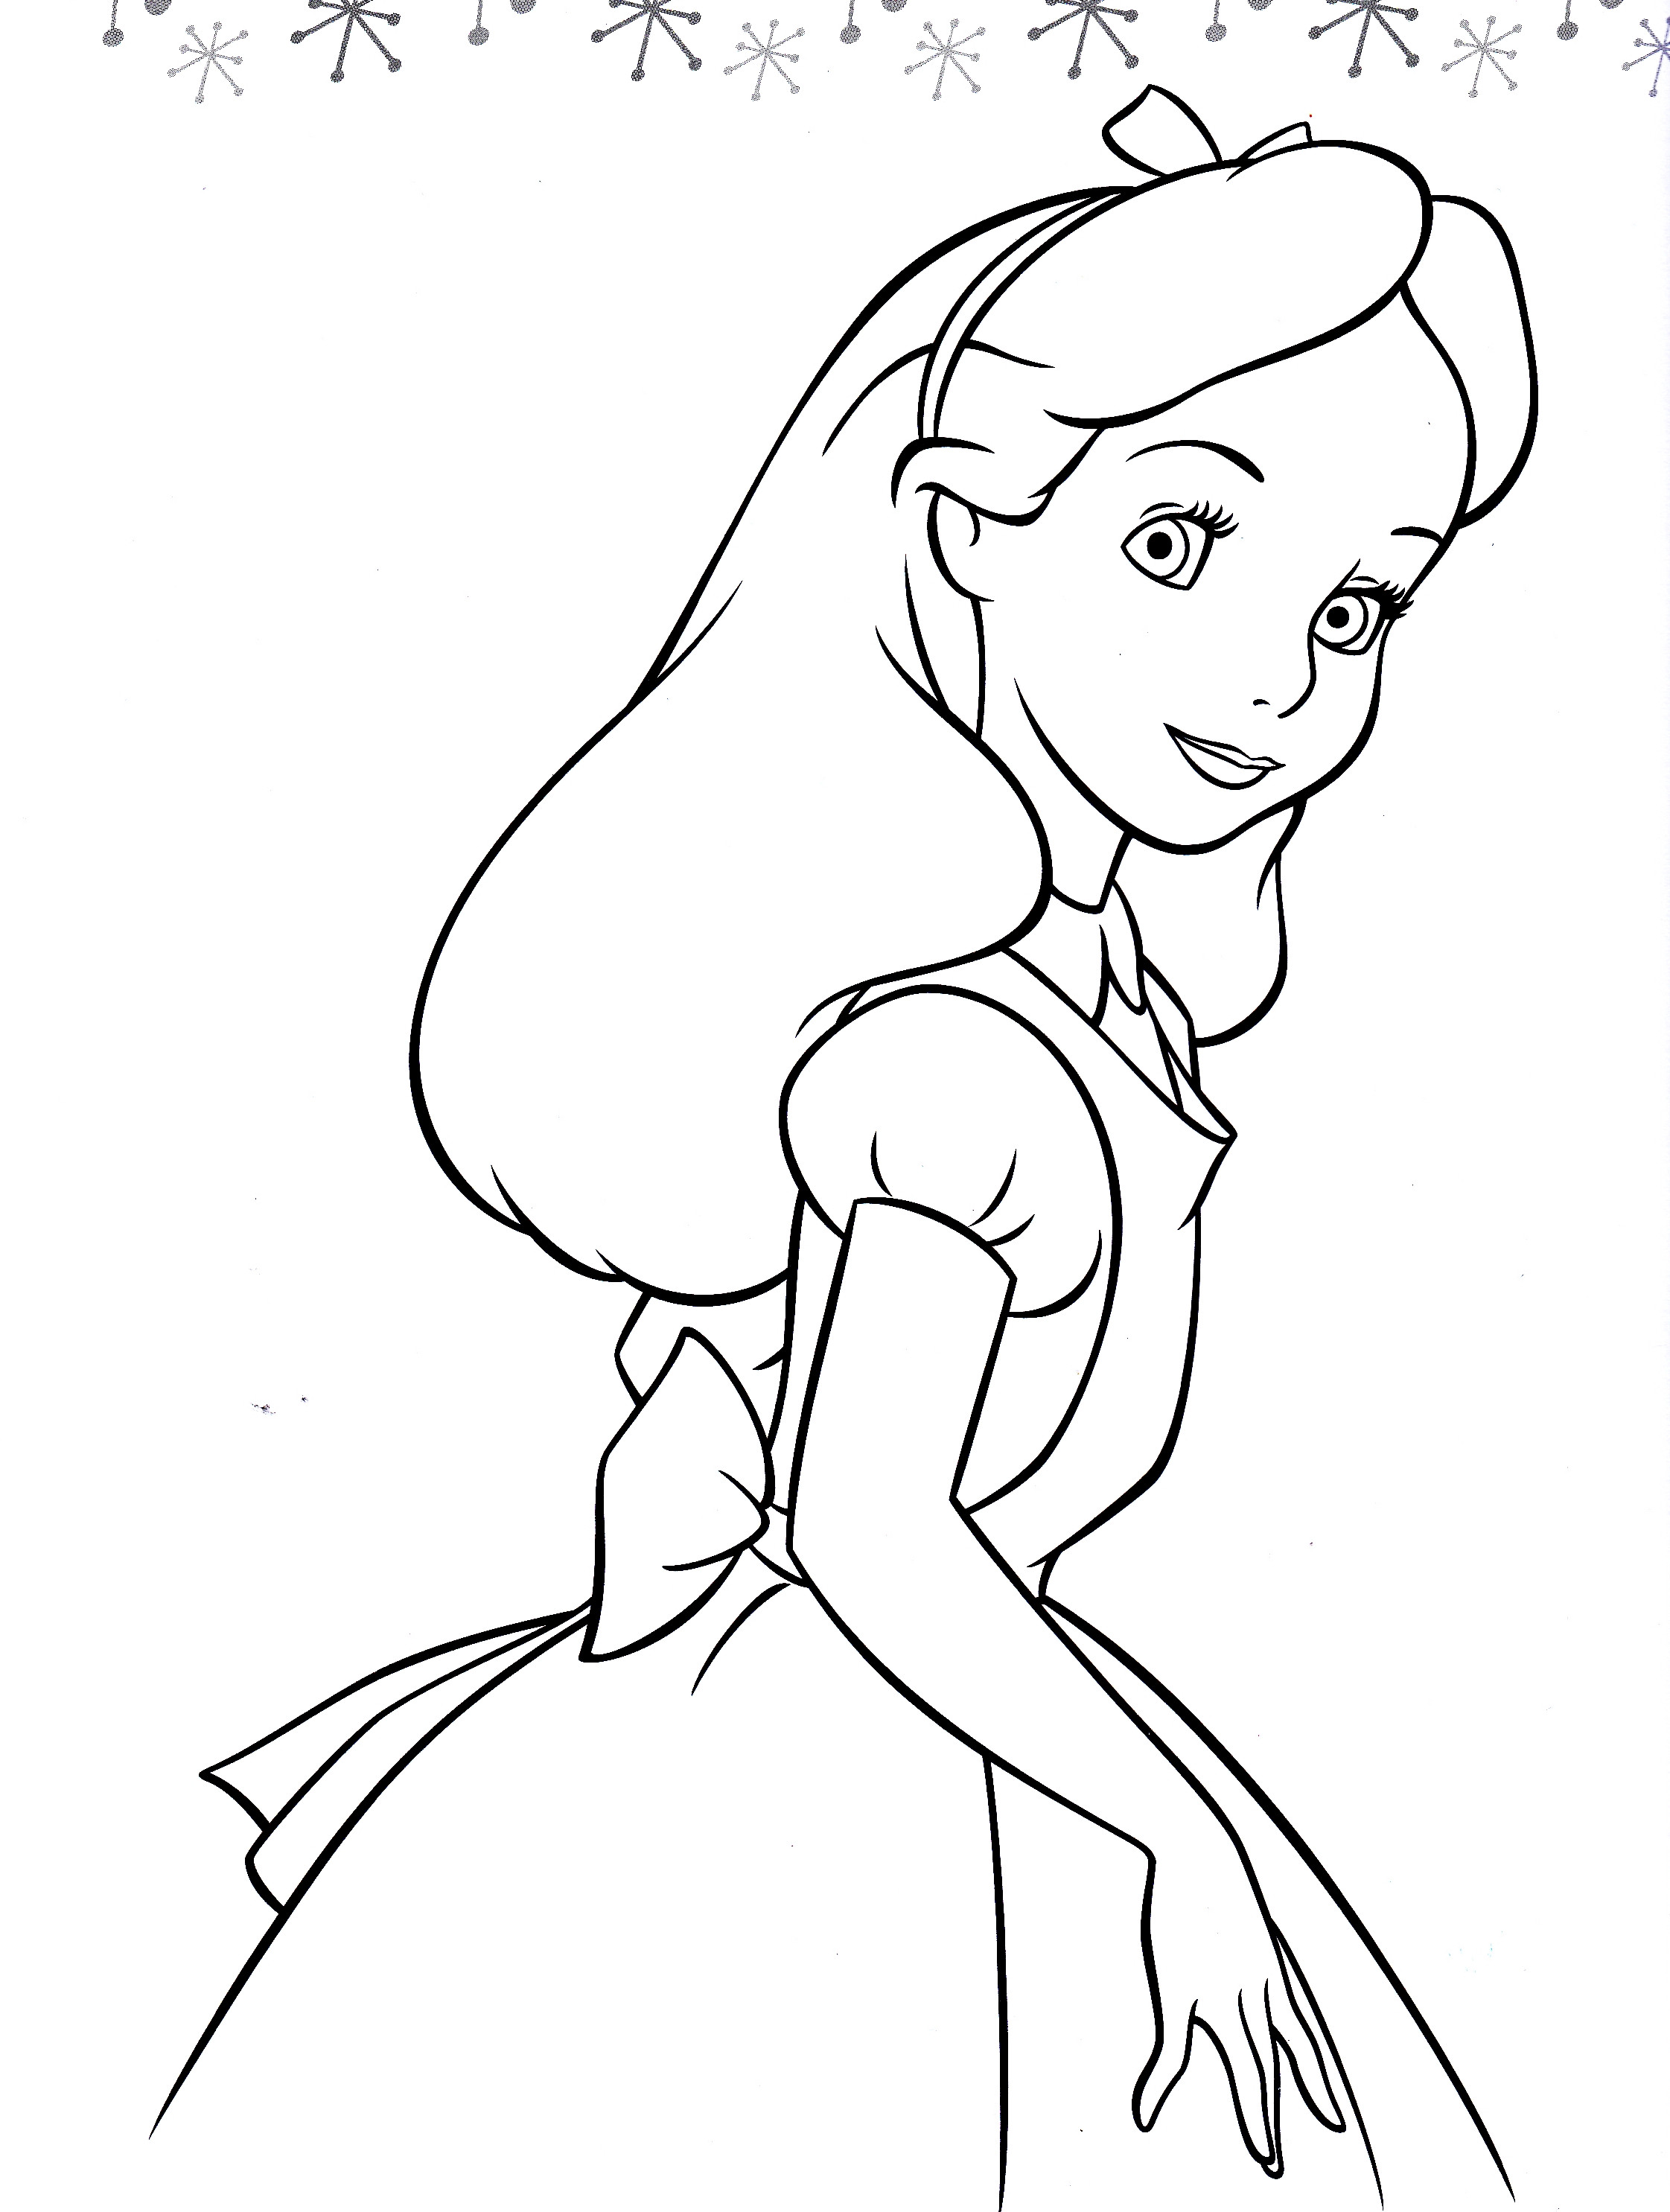 Coloring Pages Of Disney Characters
 Disney Characters Coloring Pages coloringsuite